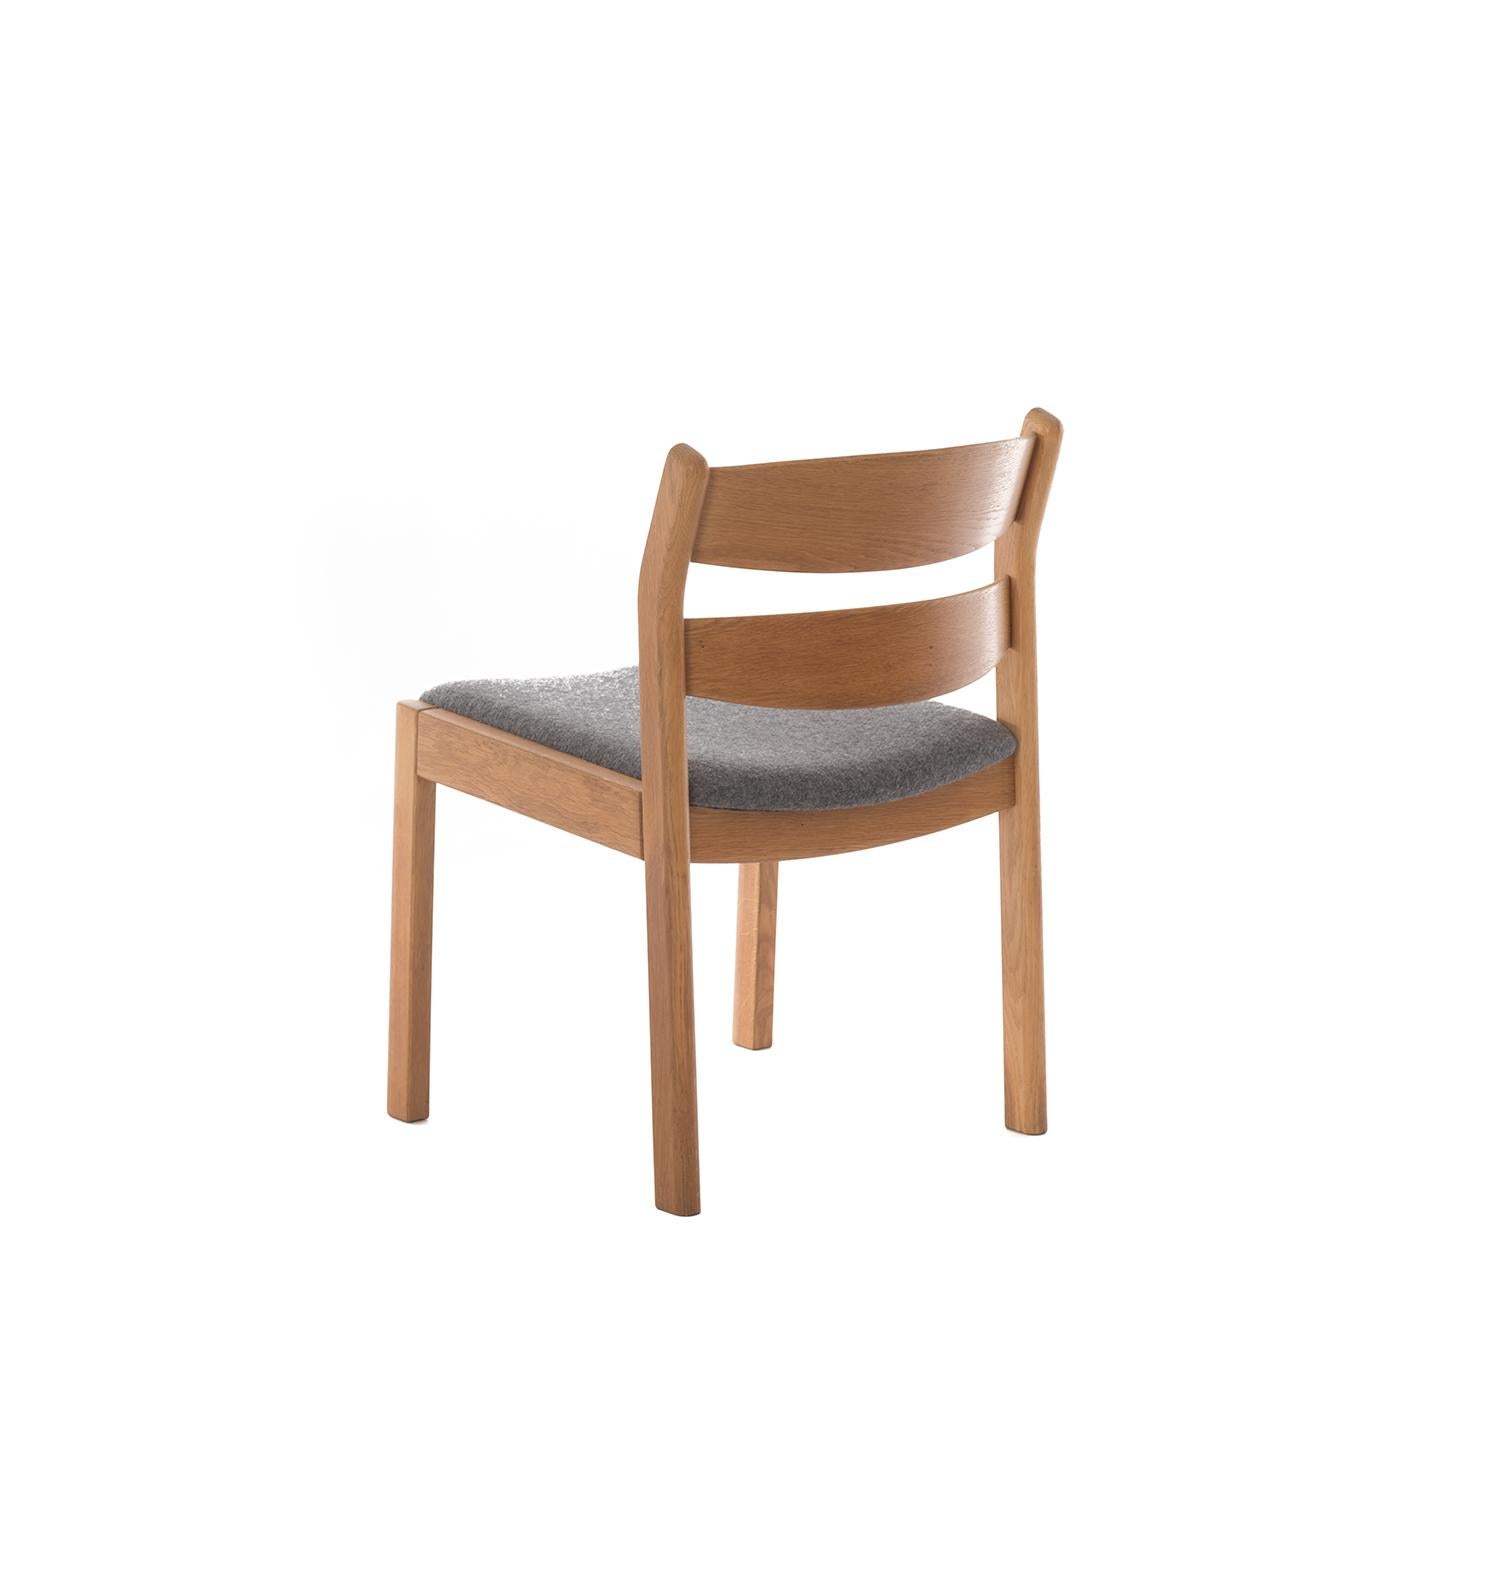 20th Century Scandinavian Modern Oak Dining Chairs with Boiled Wool Seats by Kurt Ostervig